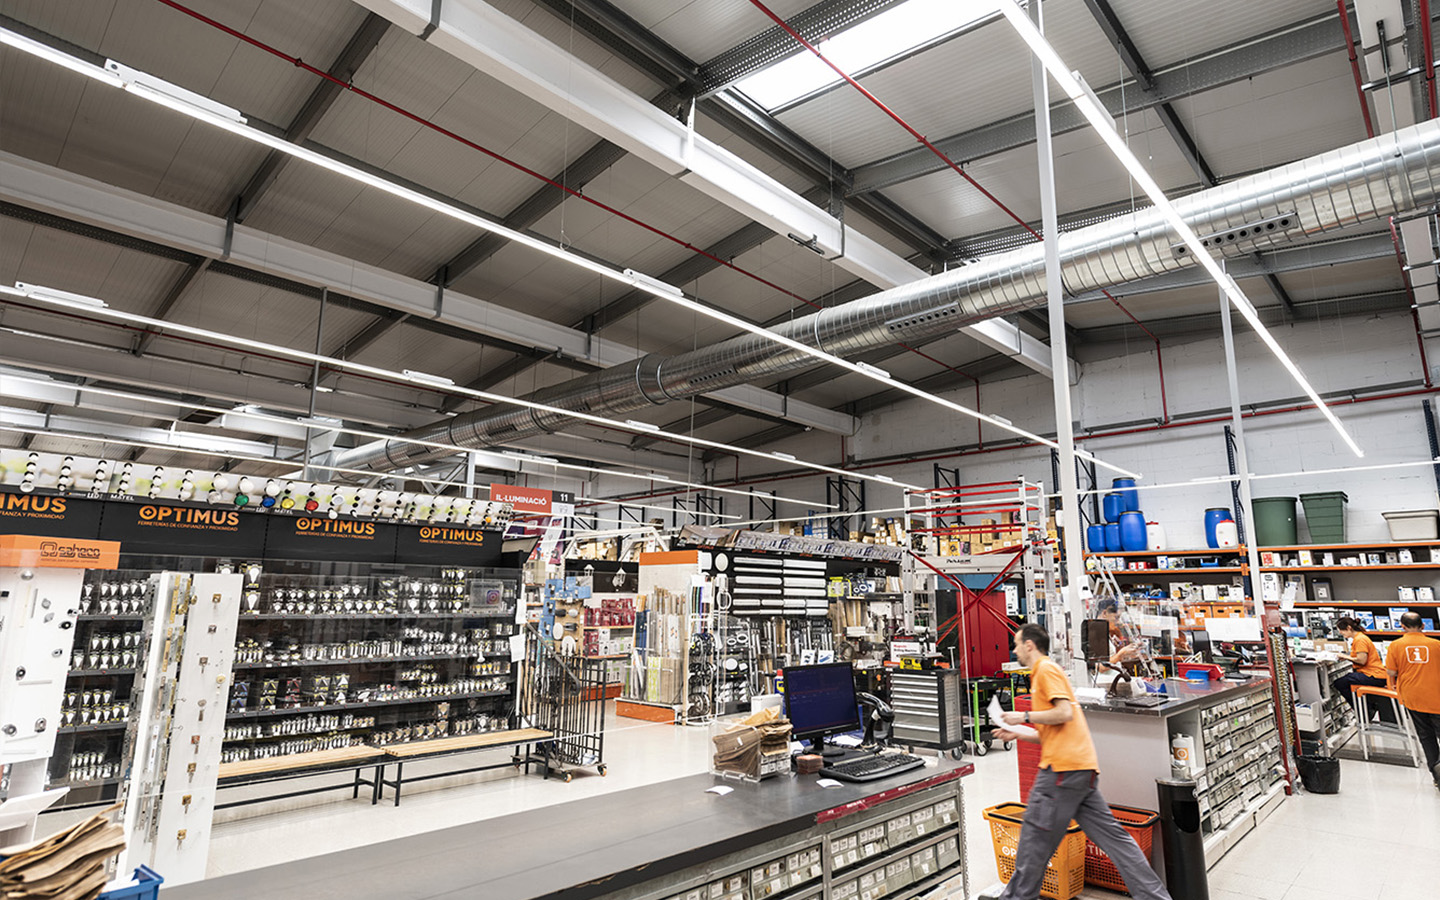  Canaled: Leader in industrial lighting 